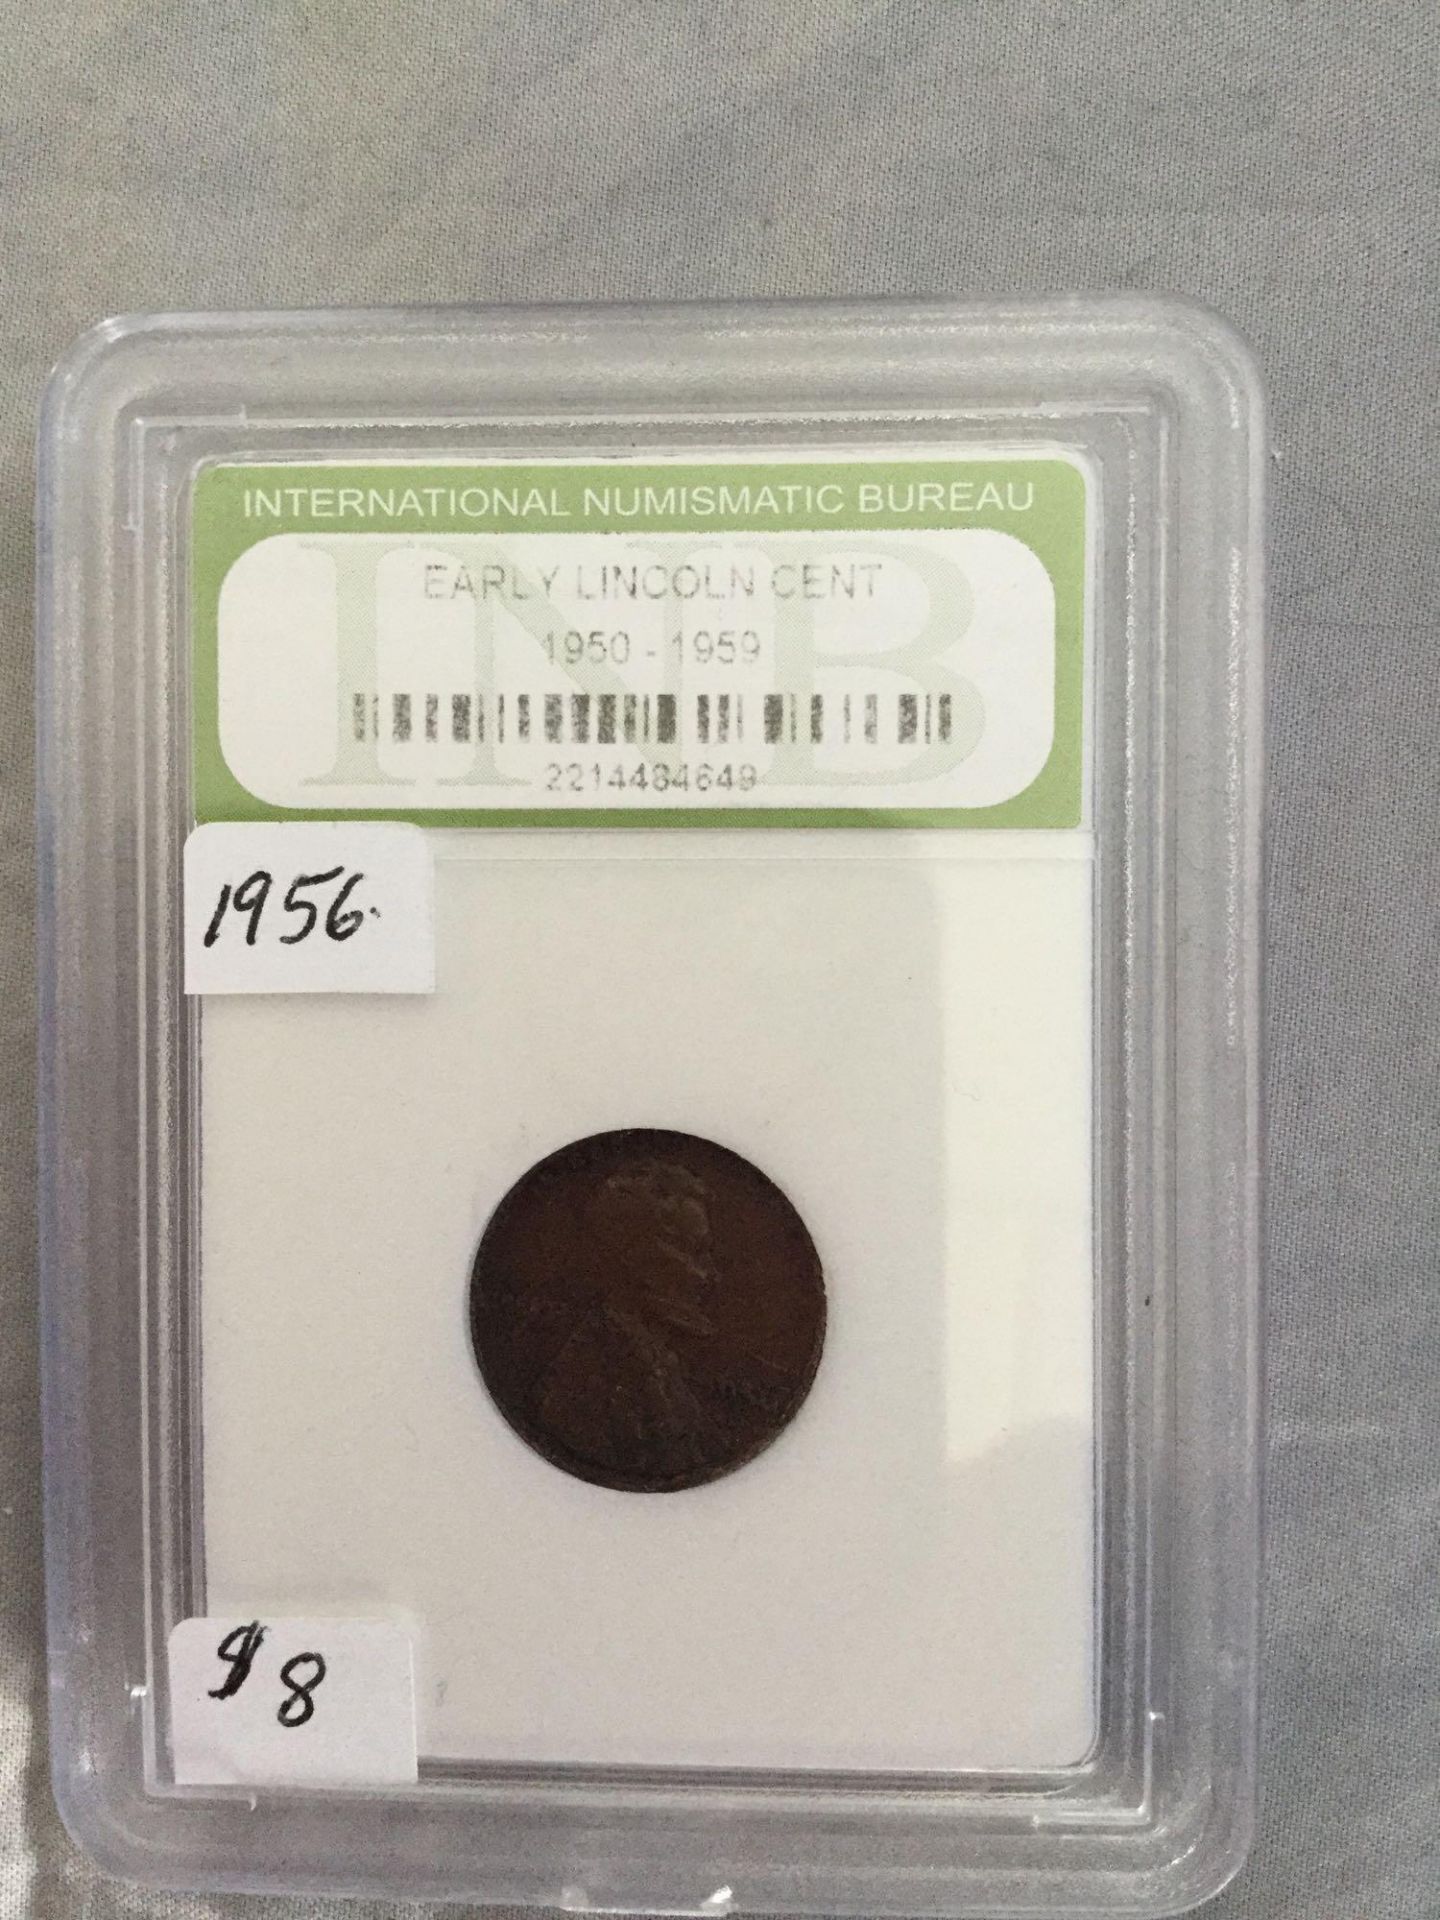 1956 - US Early Lincoln Cent